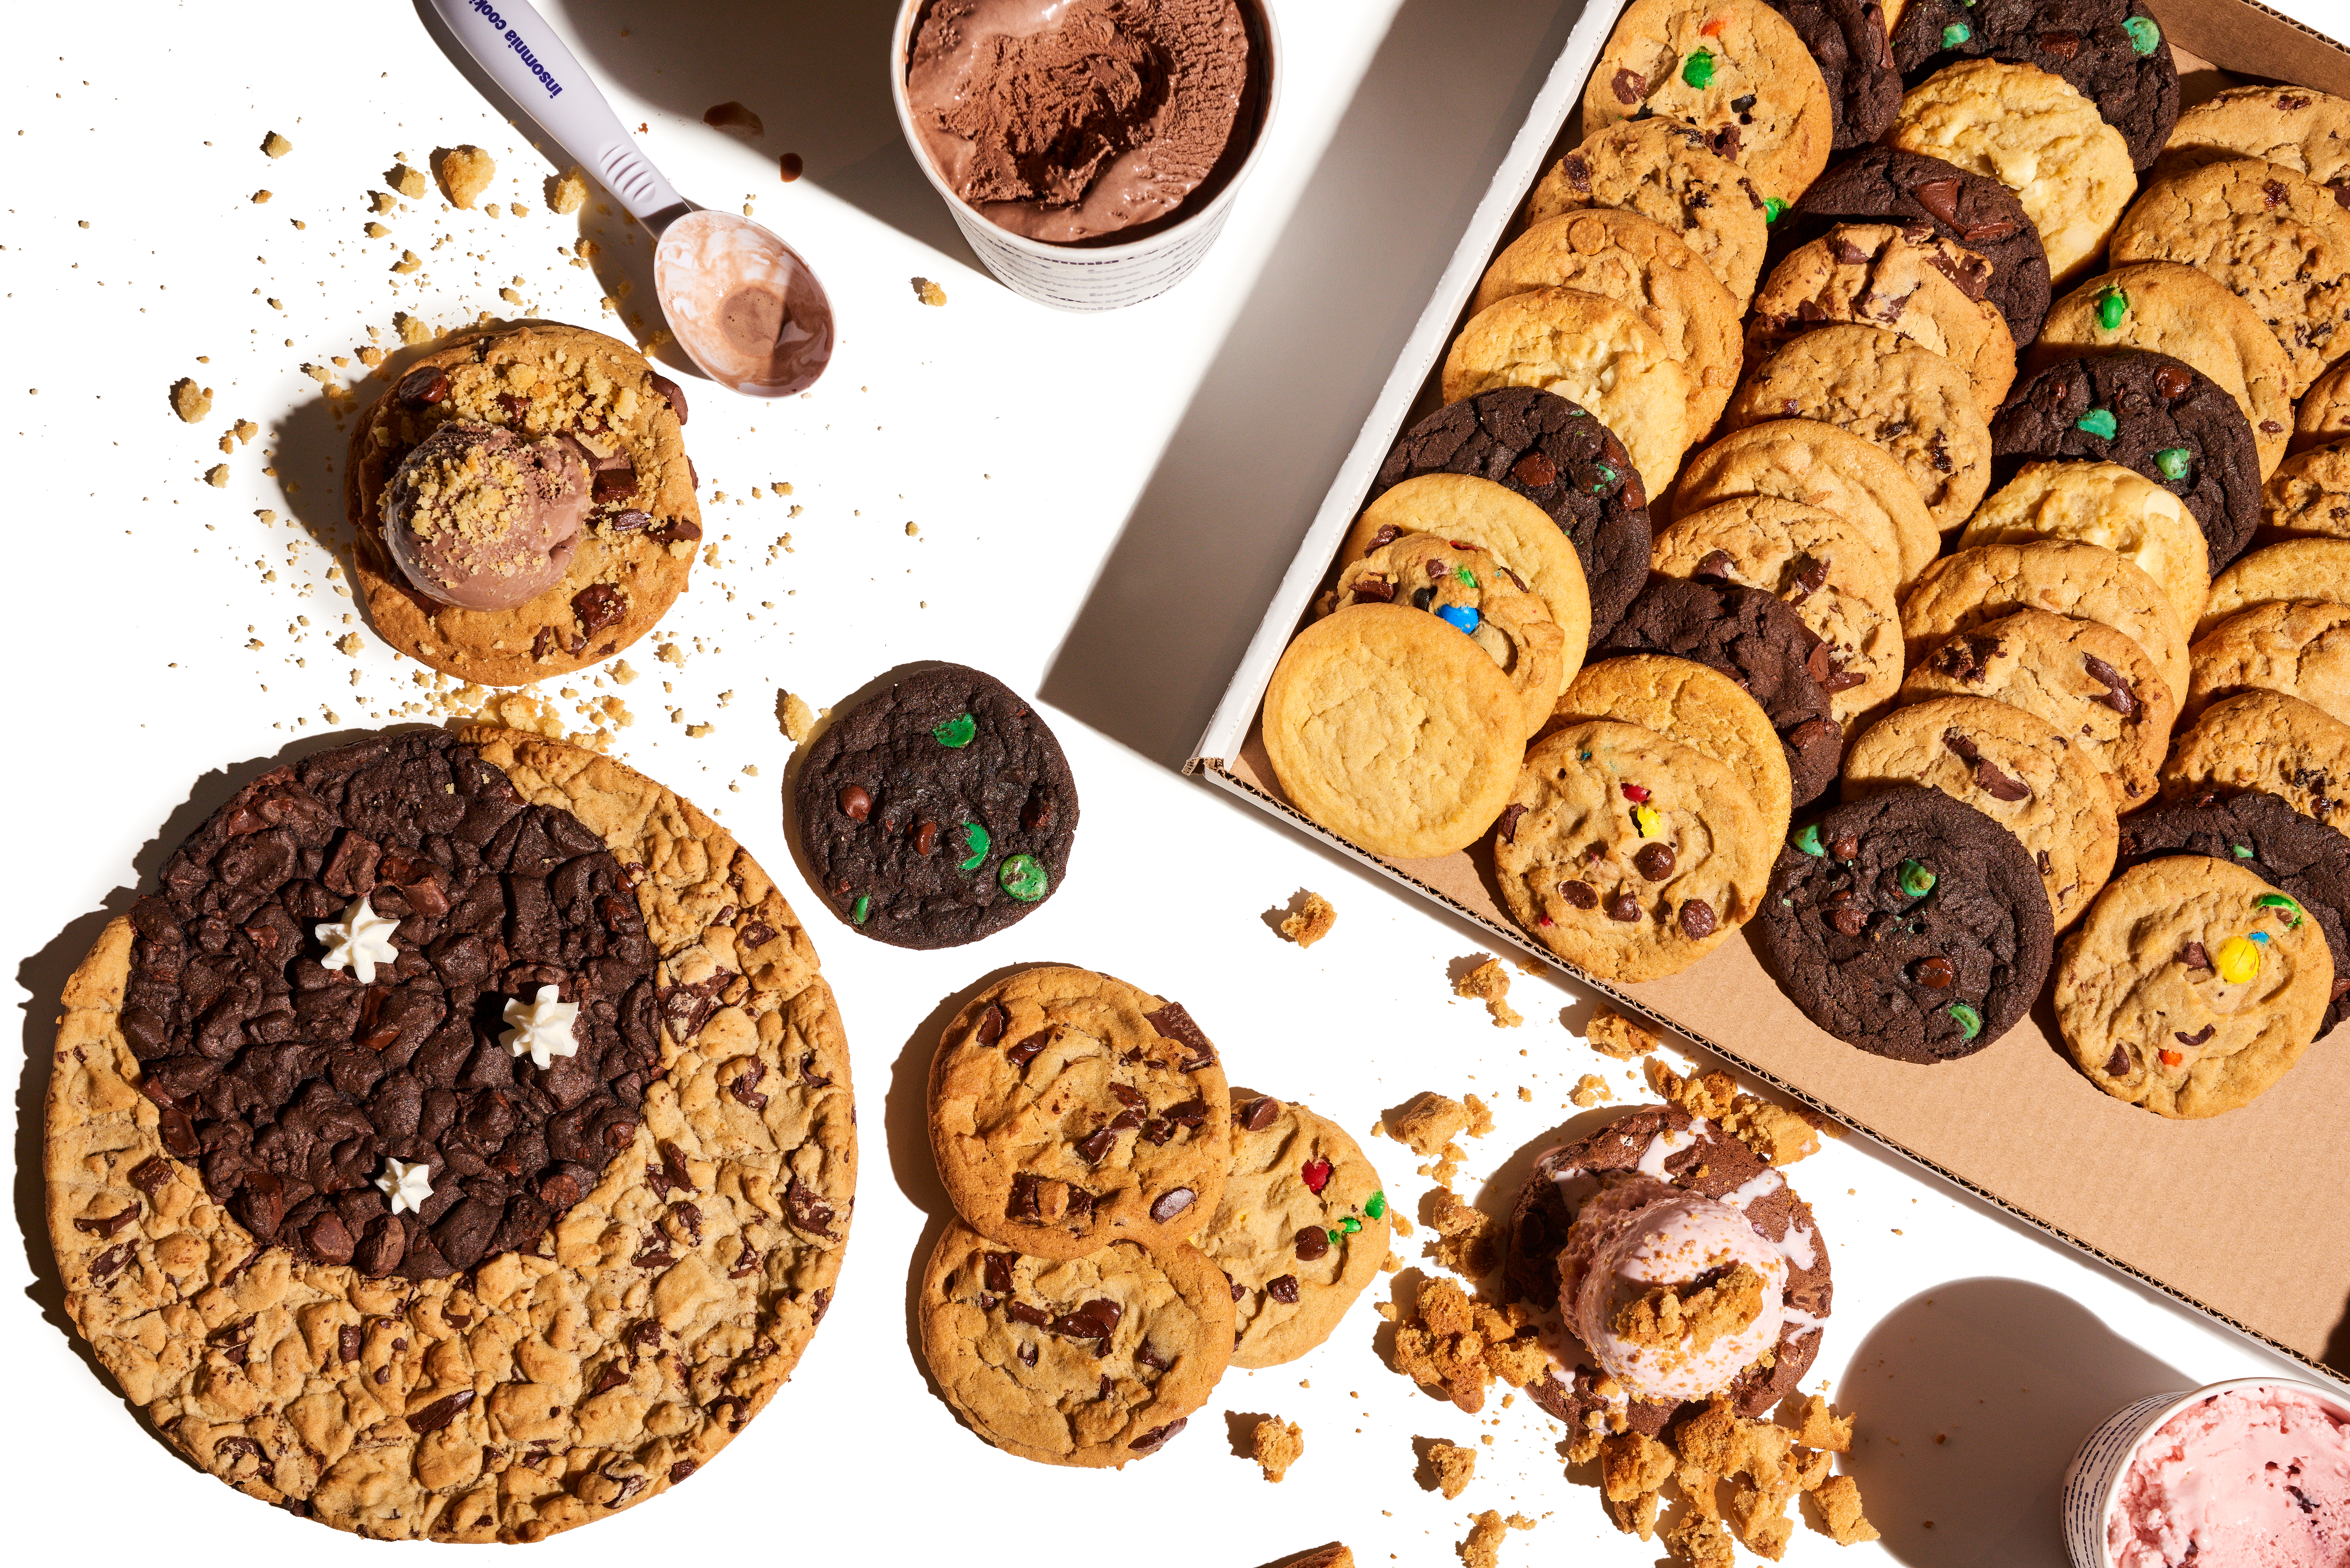 A cookie sheet and a table filled with an assortment of Insomnia cookies, plus a tub of chocolate ice cream.